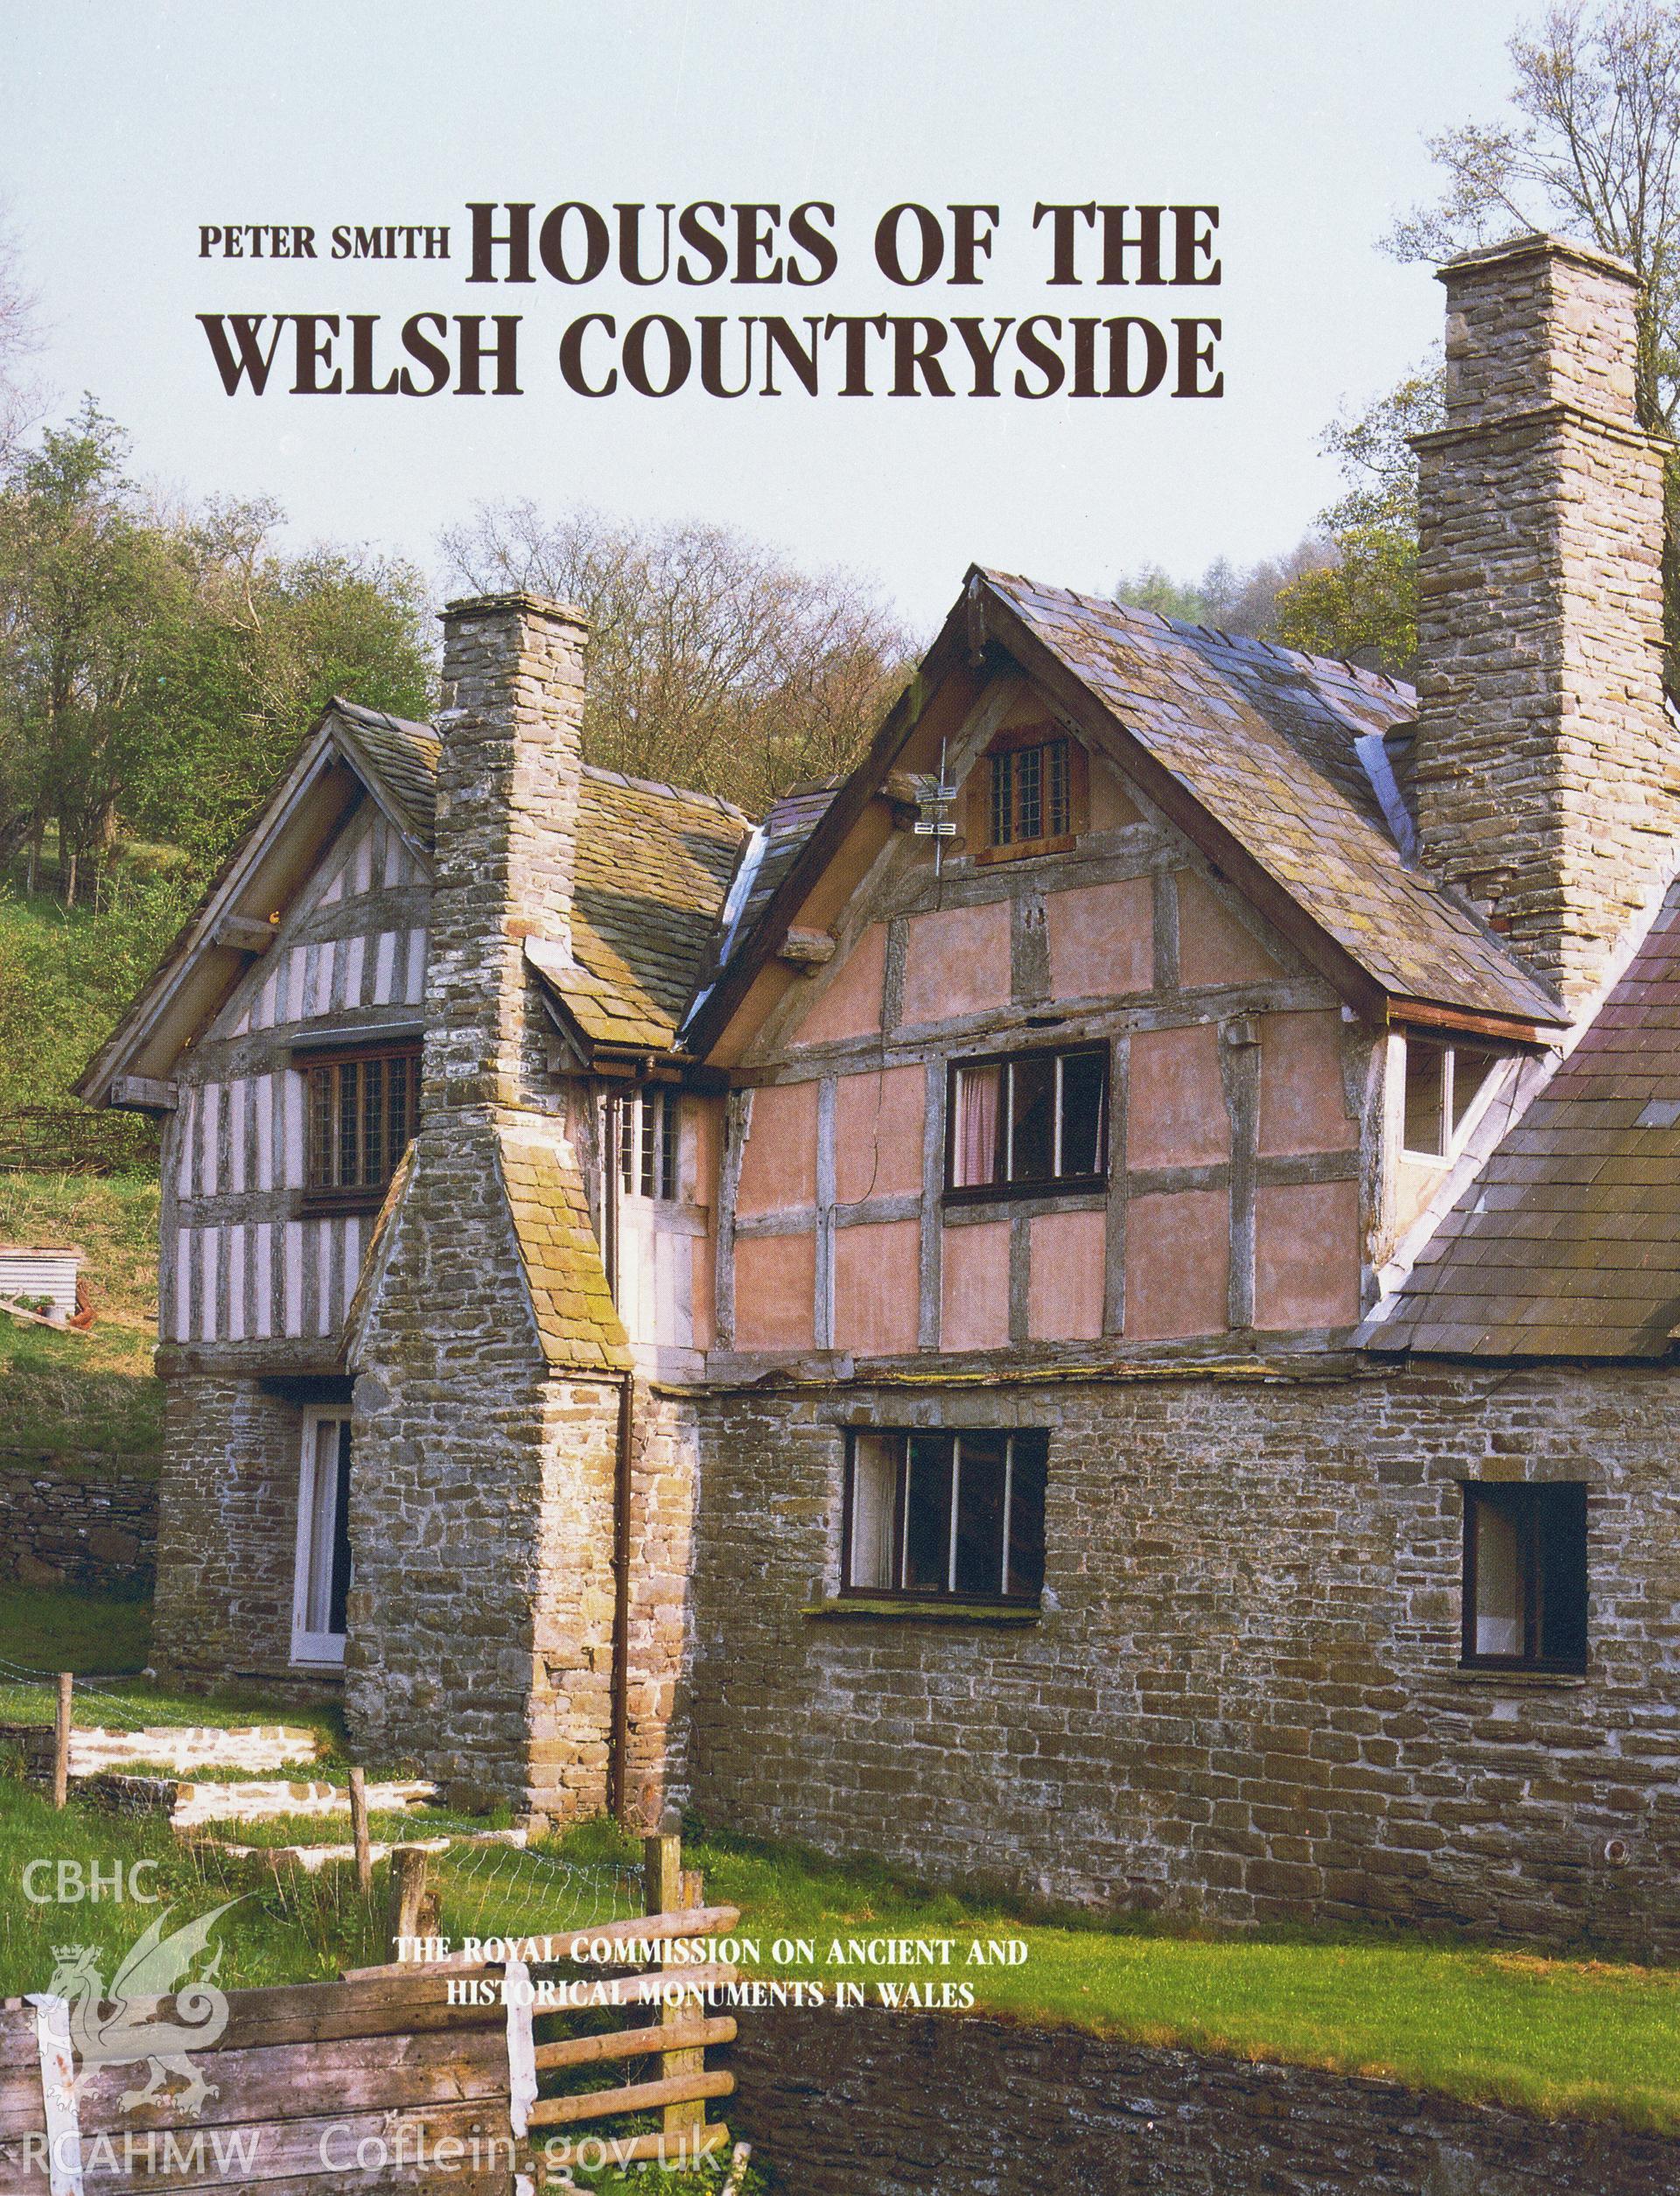 Colour transparency of the cover of the RCAHMW Publication of Houses of the Welsh Countryside by Peter Smith, 2nd  Edition.